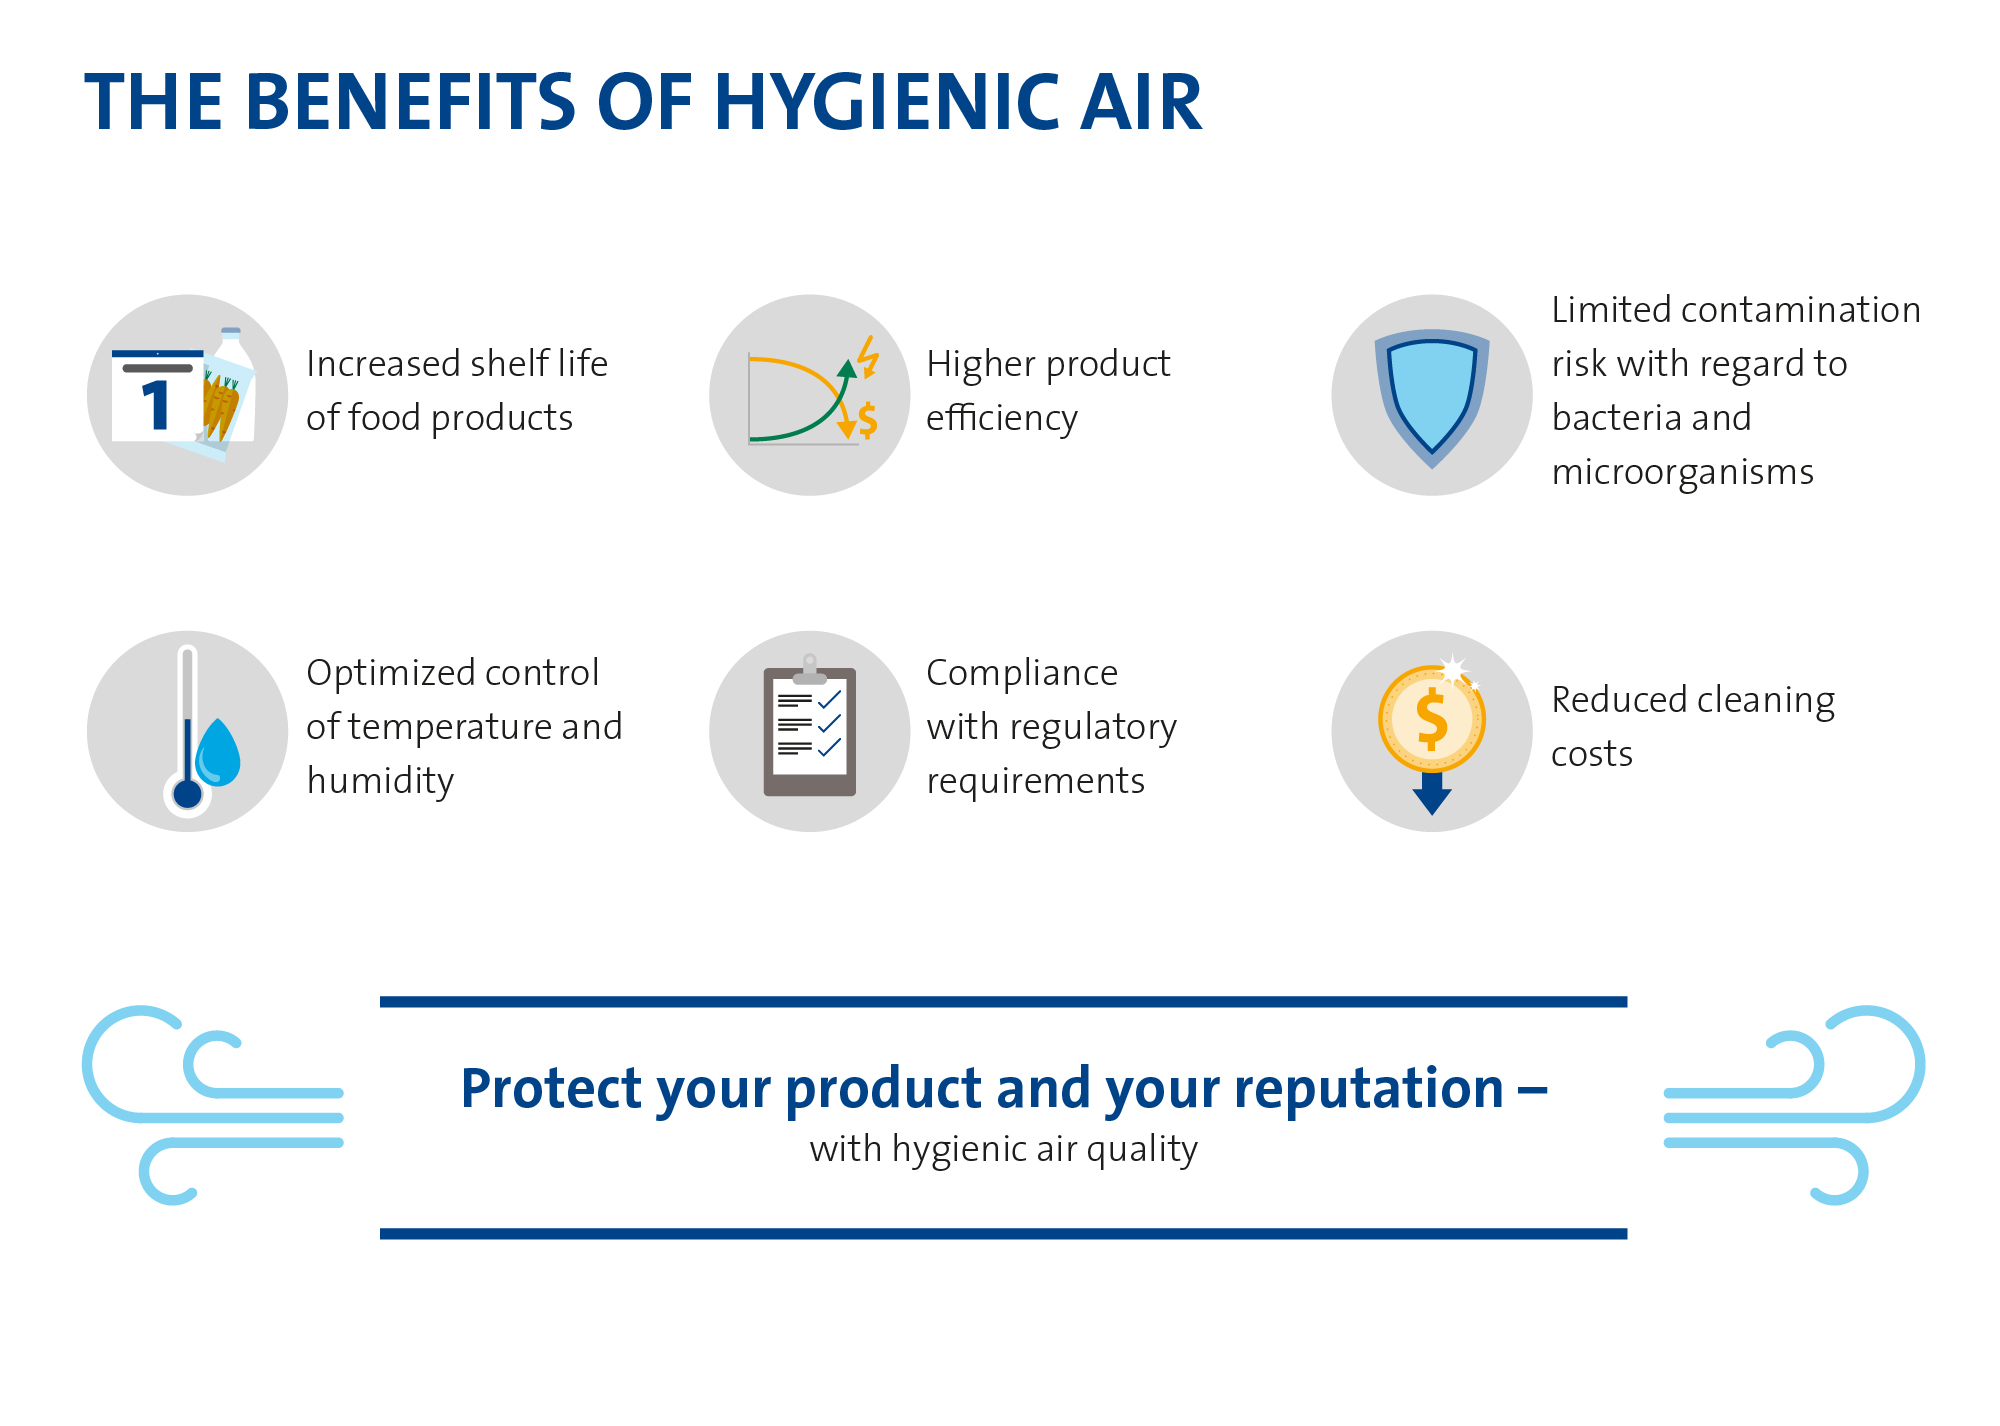 The benefits of hygienic air